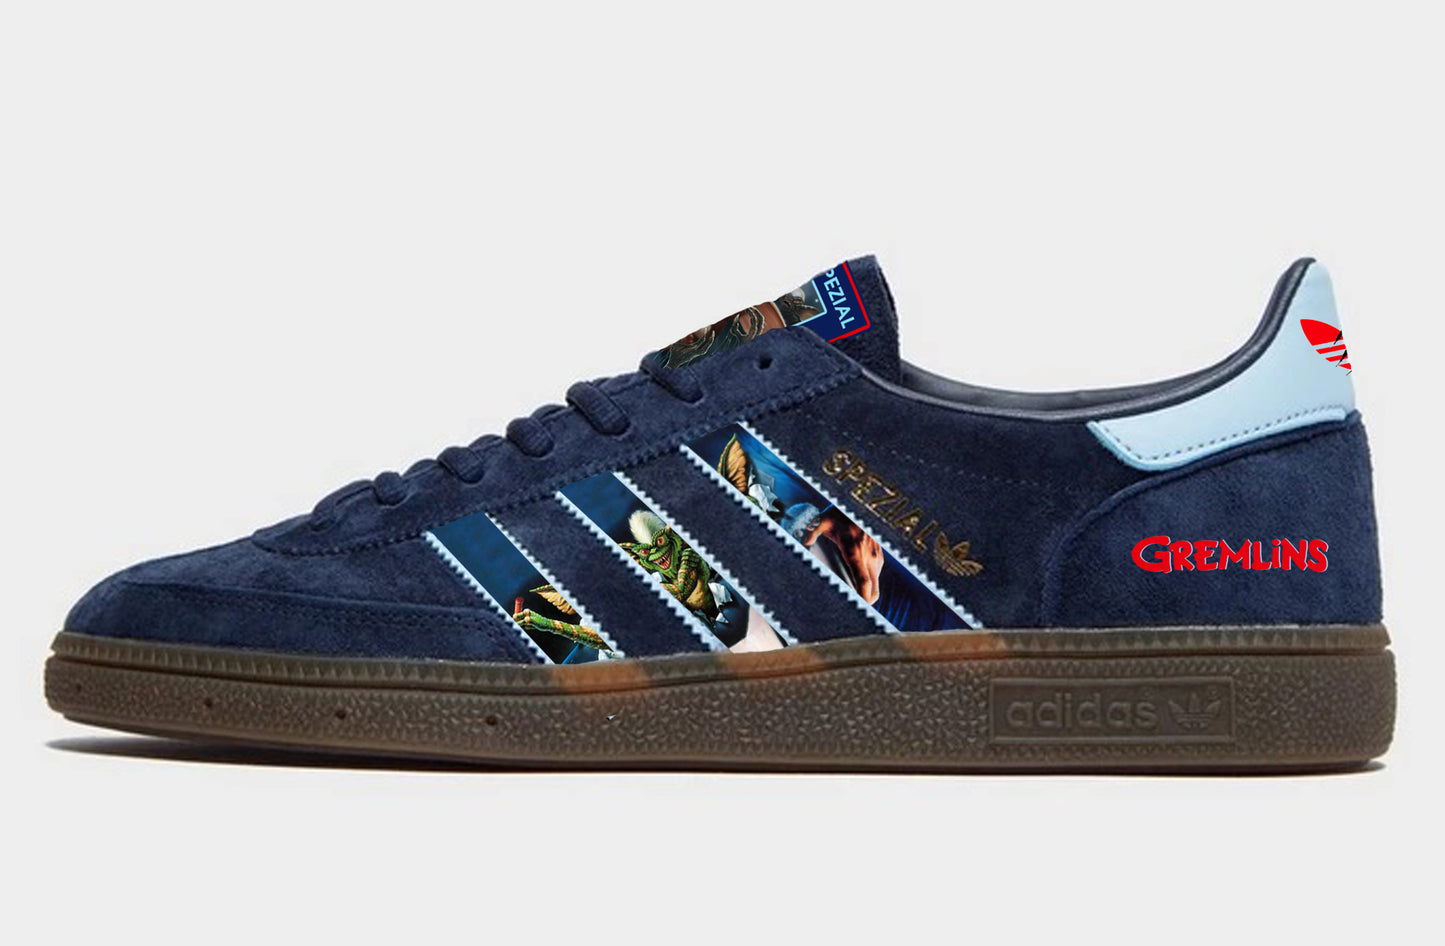 Limited edition Gremlins Navy Blue Adidas Spezial trainers / sneakers